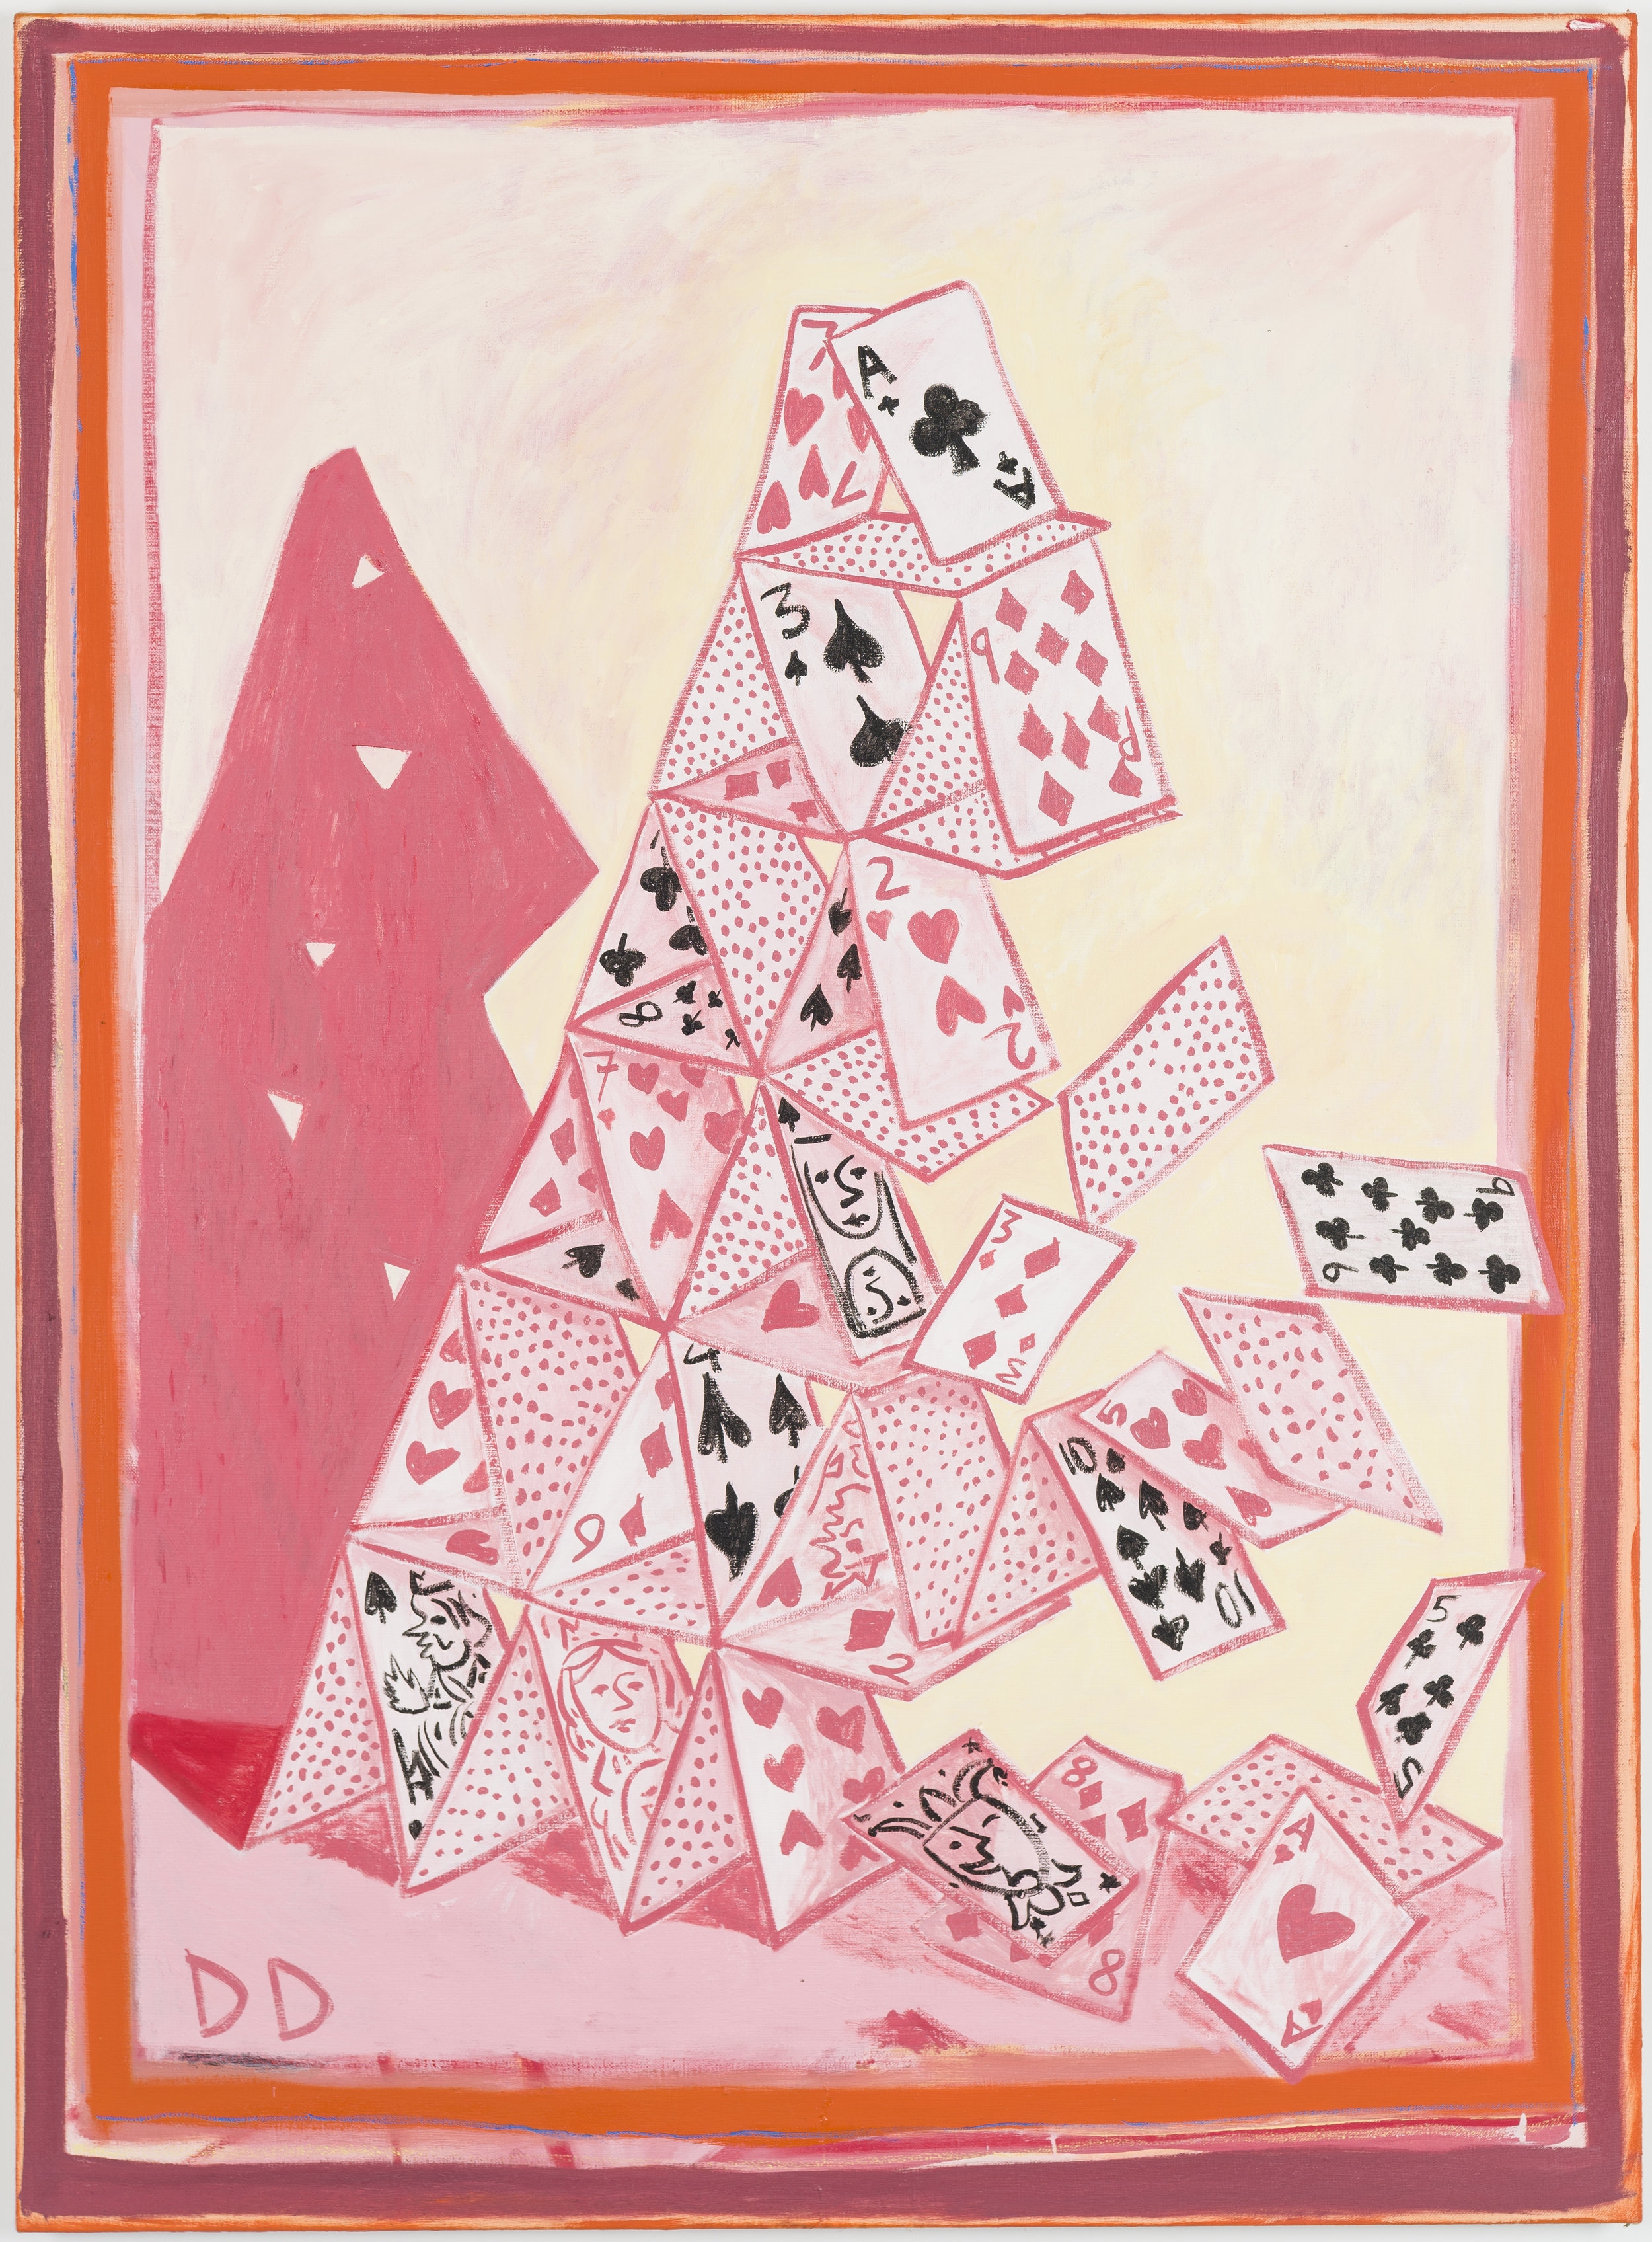    House of Cards  Oil on Flax  150 x 110 cm  2018 